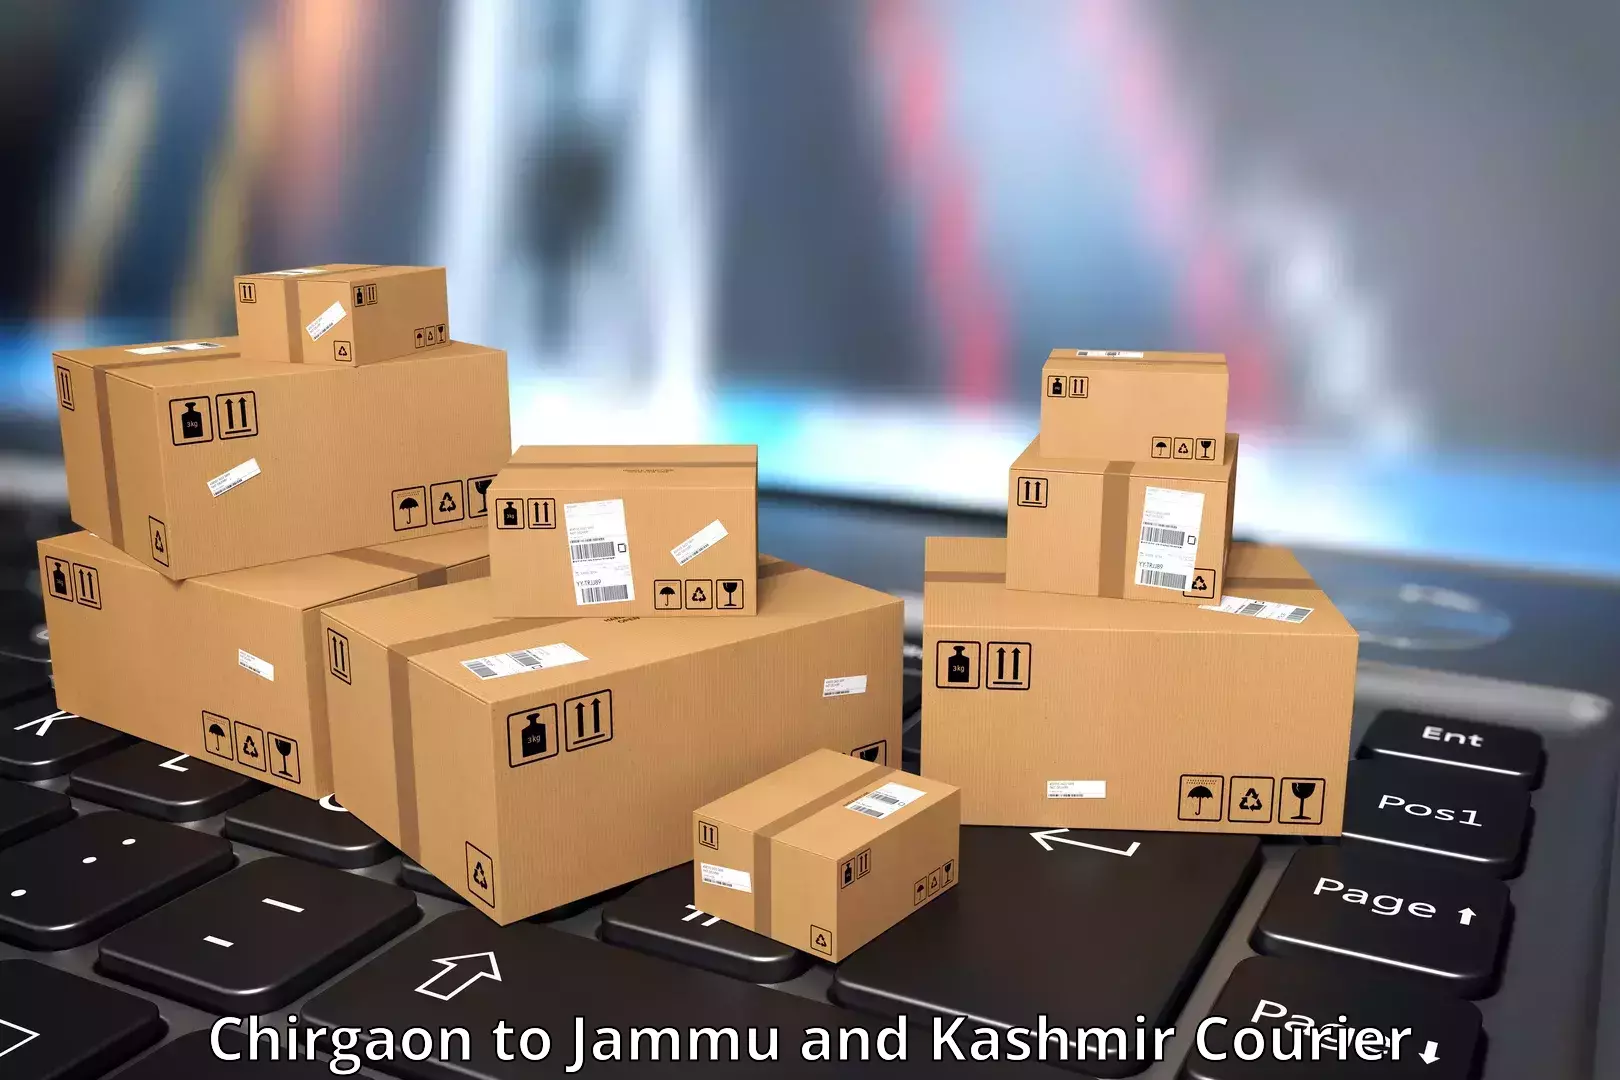 Cash on delivery service Chirgaon to Budgam